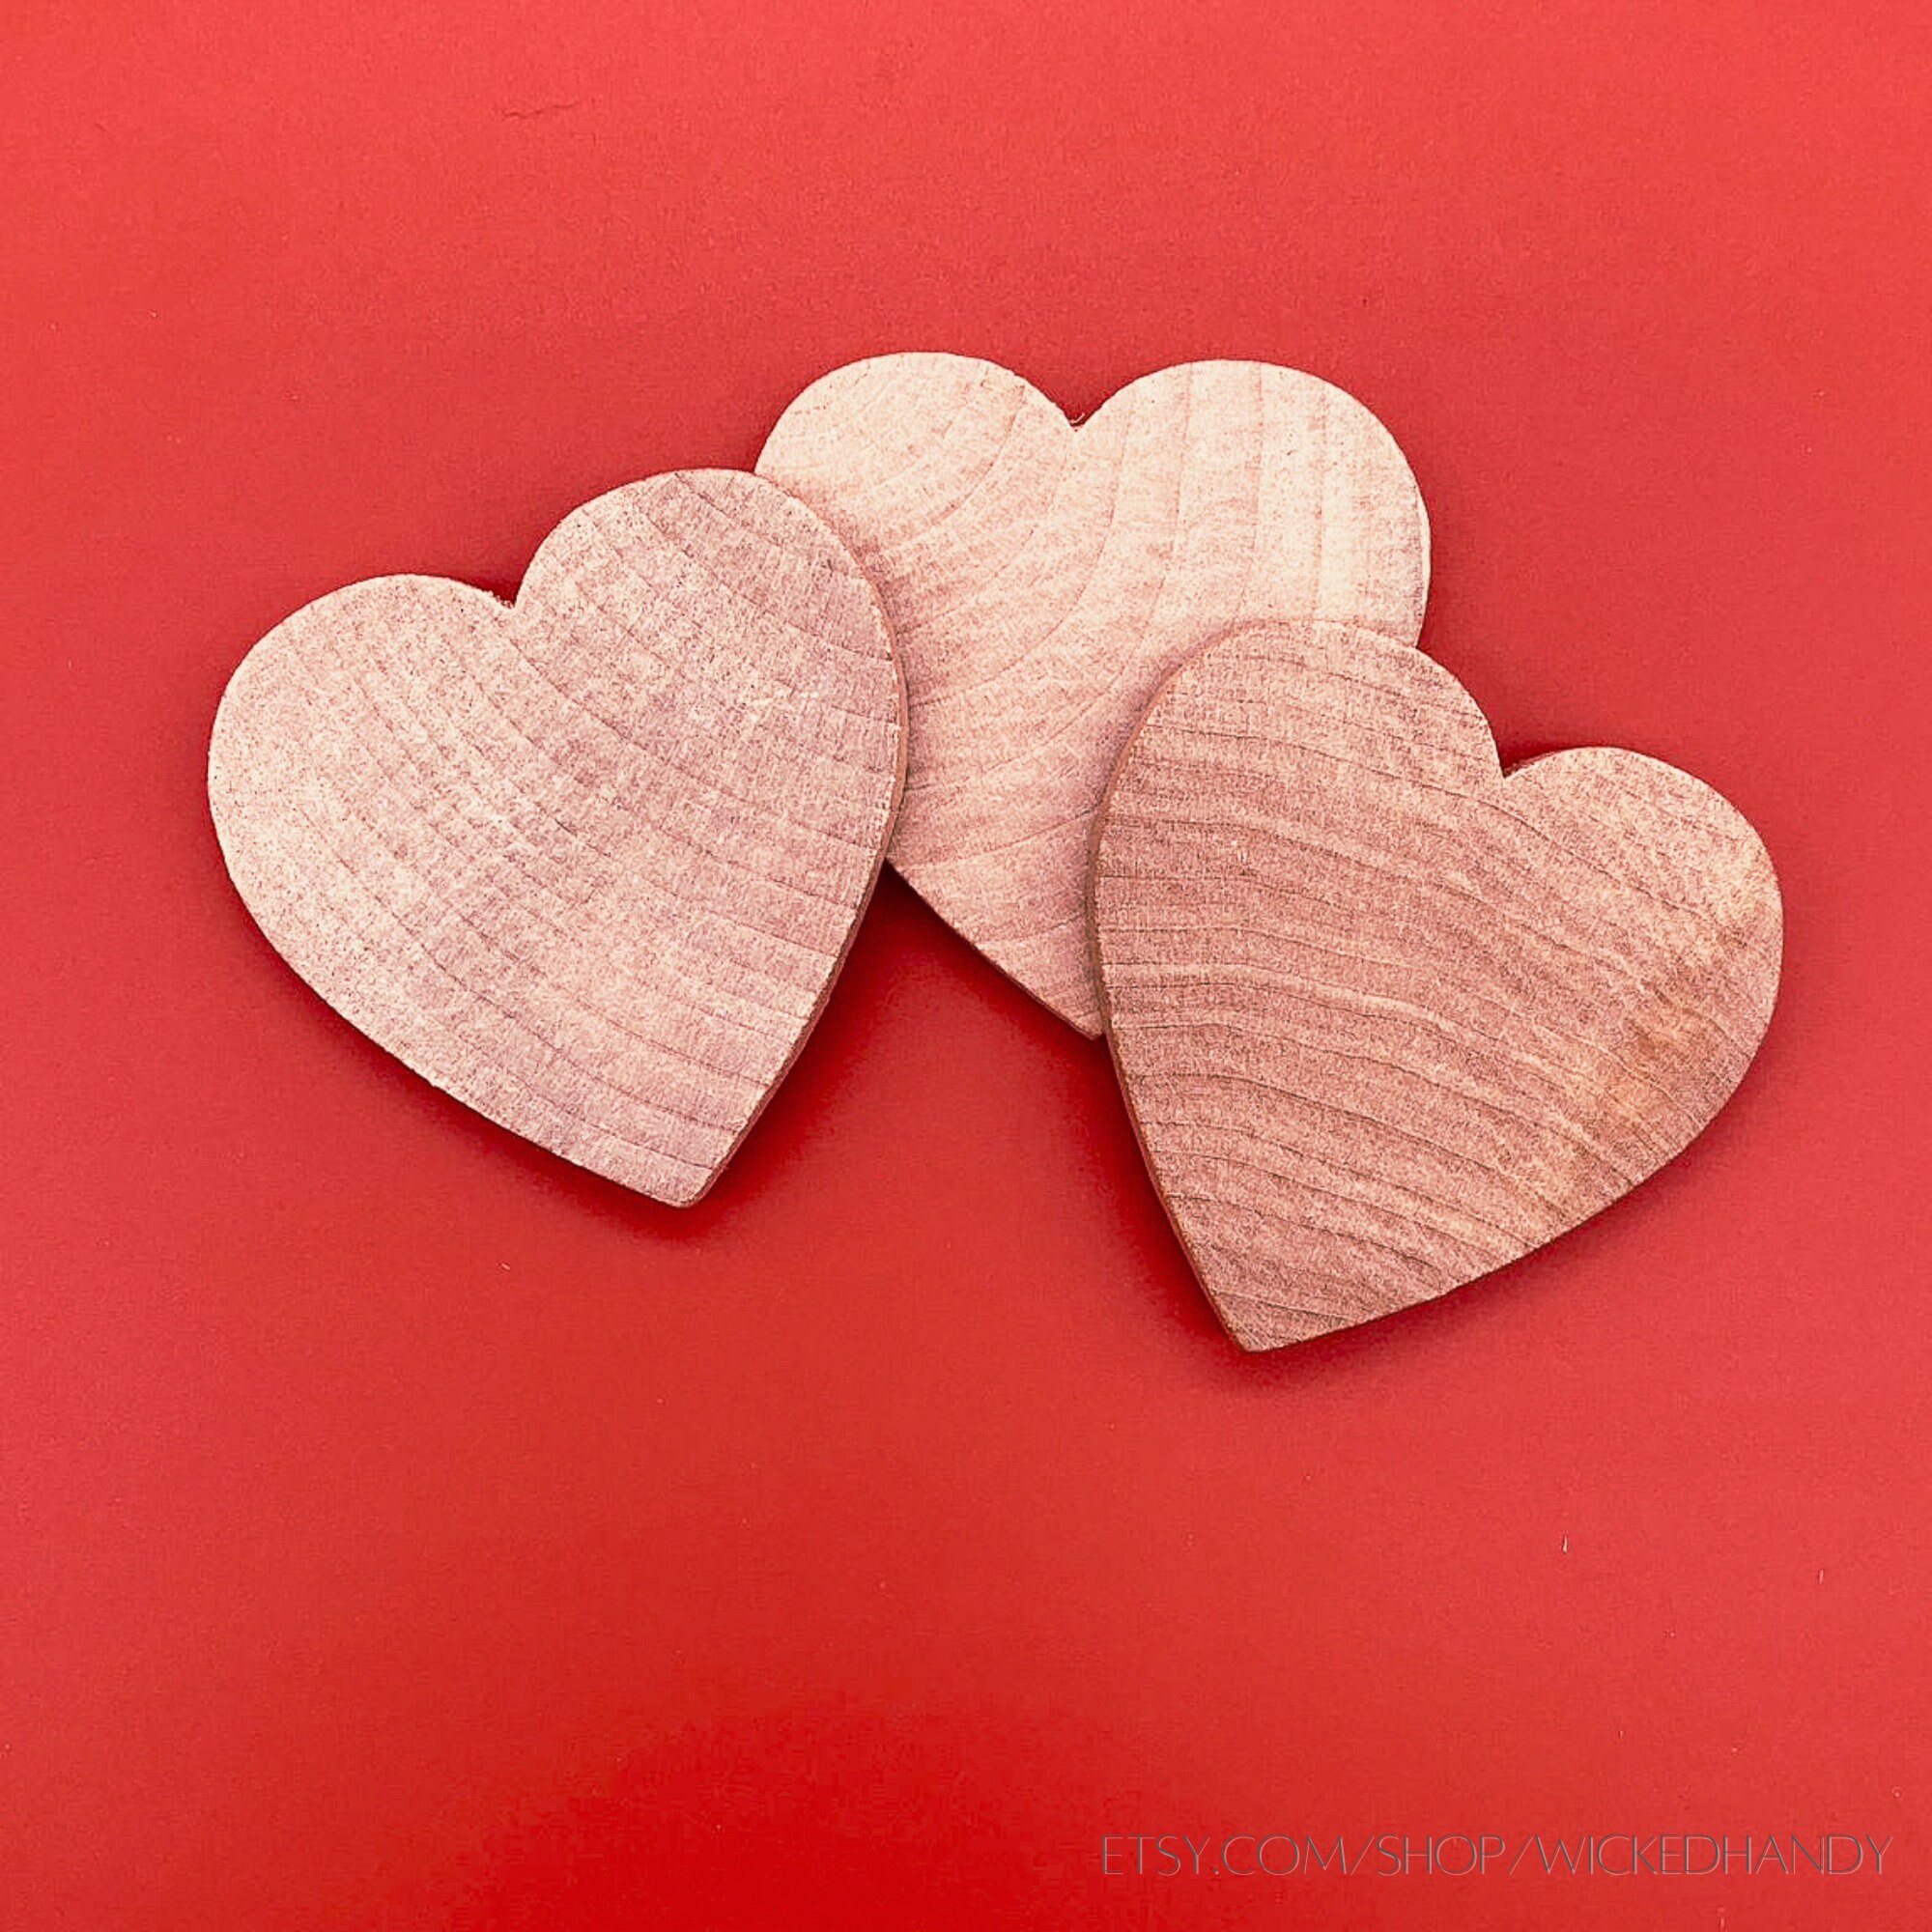 Unfinished Wood Heart, Wooden Heart Cutout, Wood Shapes for Crafts